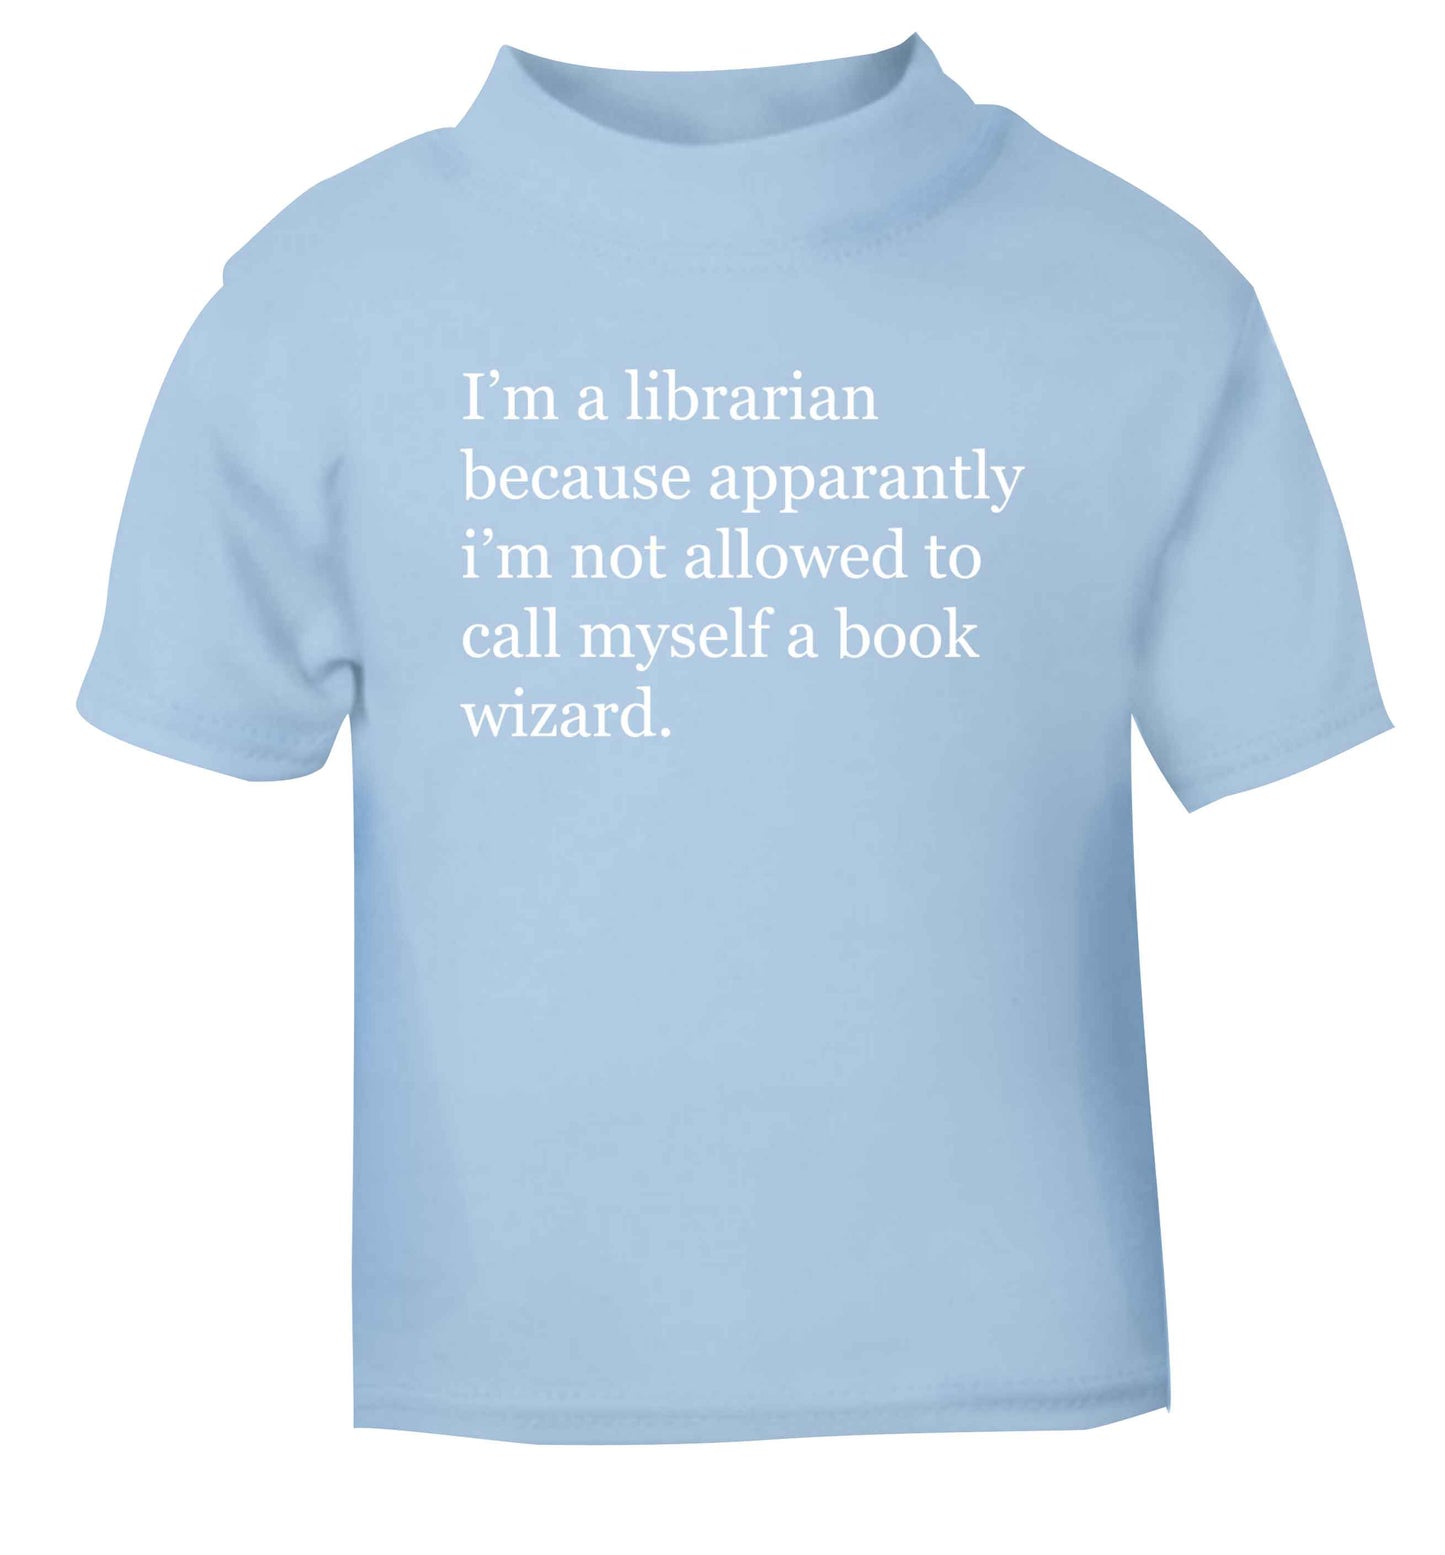 iÕm a librarian because apparantly iÕm not allowed to call myself a book wizard light blue Baby Toddler Tshirt 2 Years